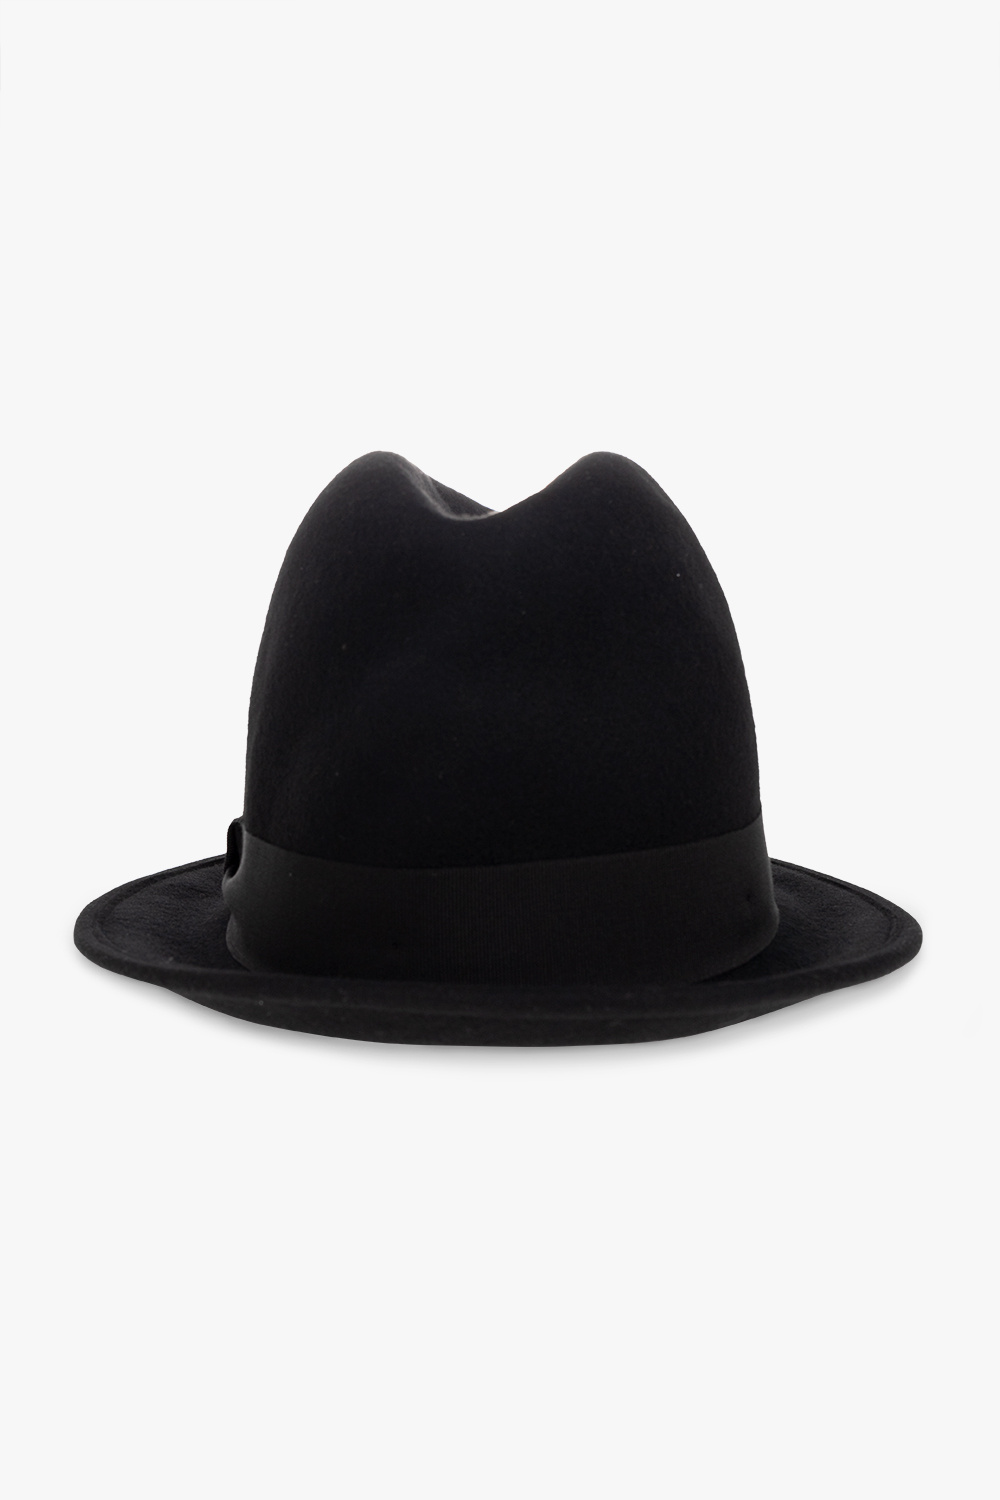 Dsquared2 Wool House hat